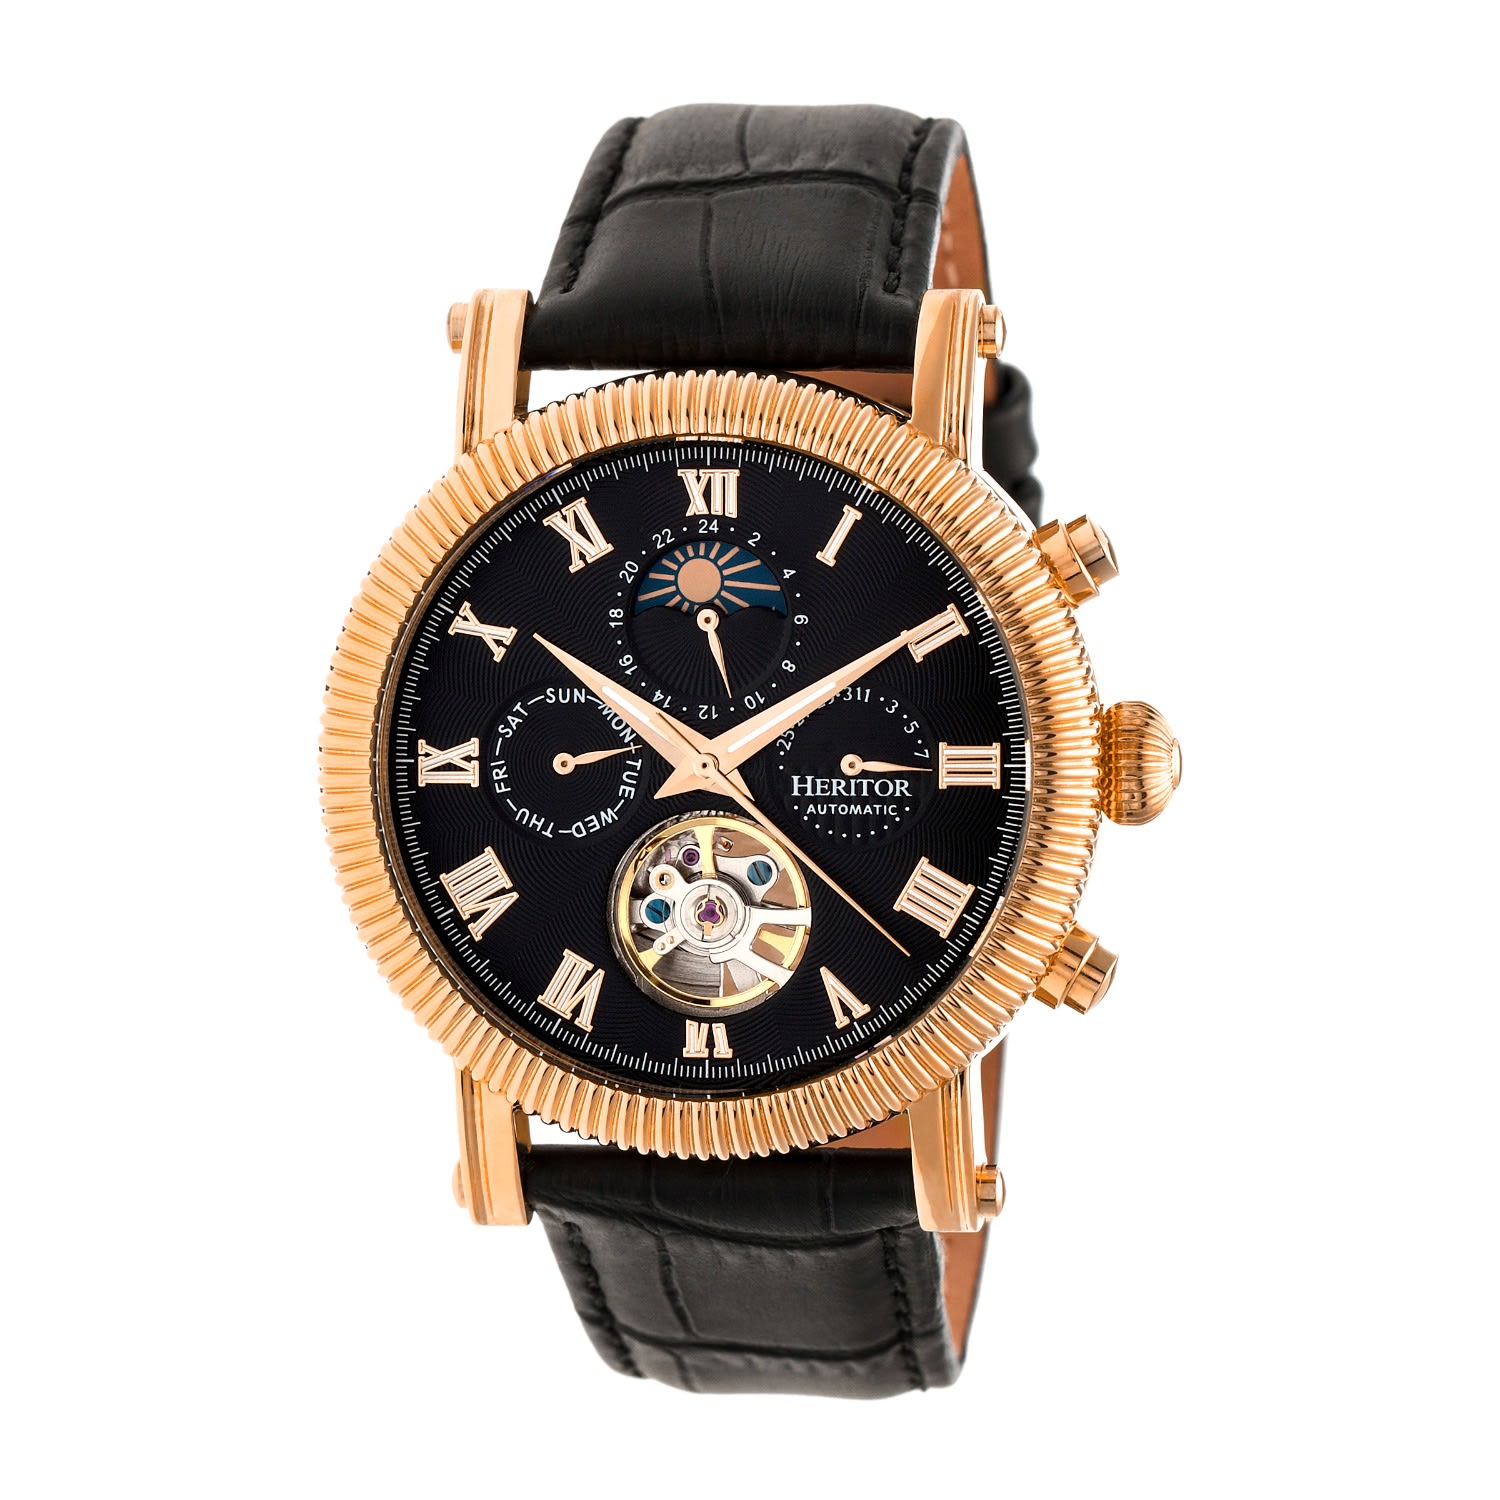 Men’s Black / Rose Gold Winston Semi-Skeleton Leather-Band Watch With Day And Date - Black, Rose Gold One Size Heritor Automatic